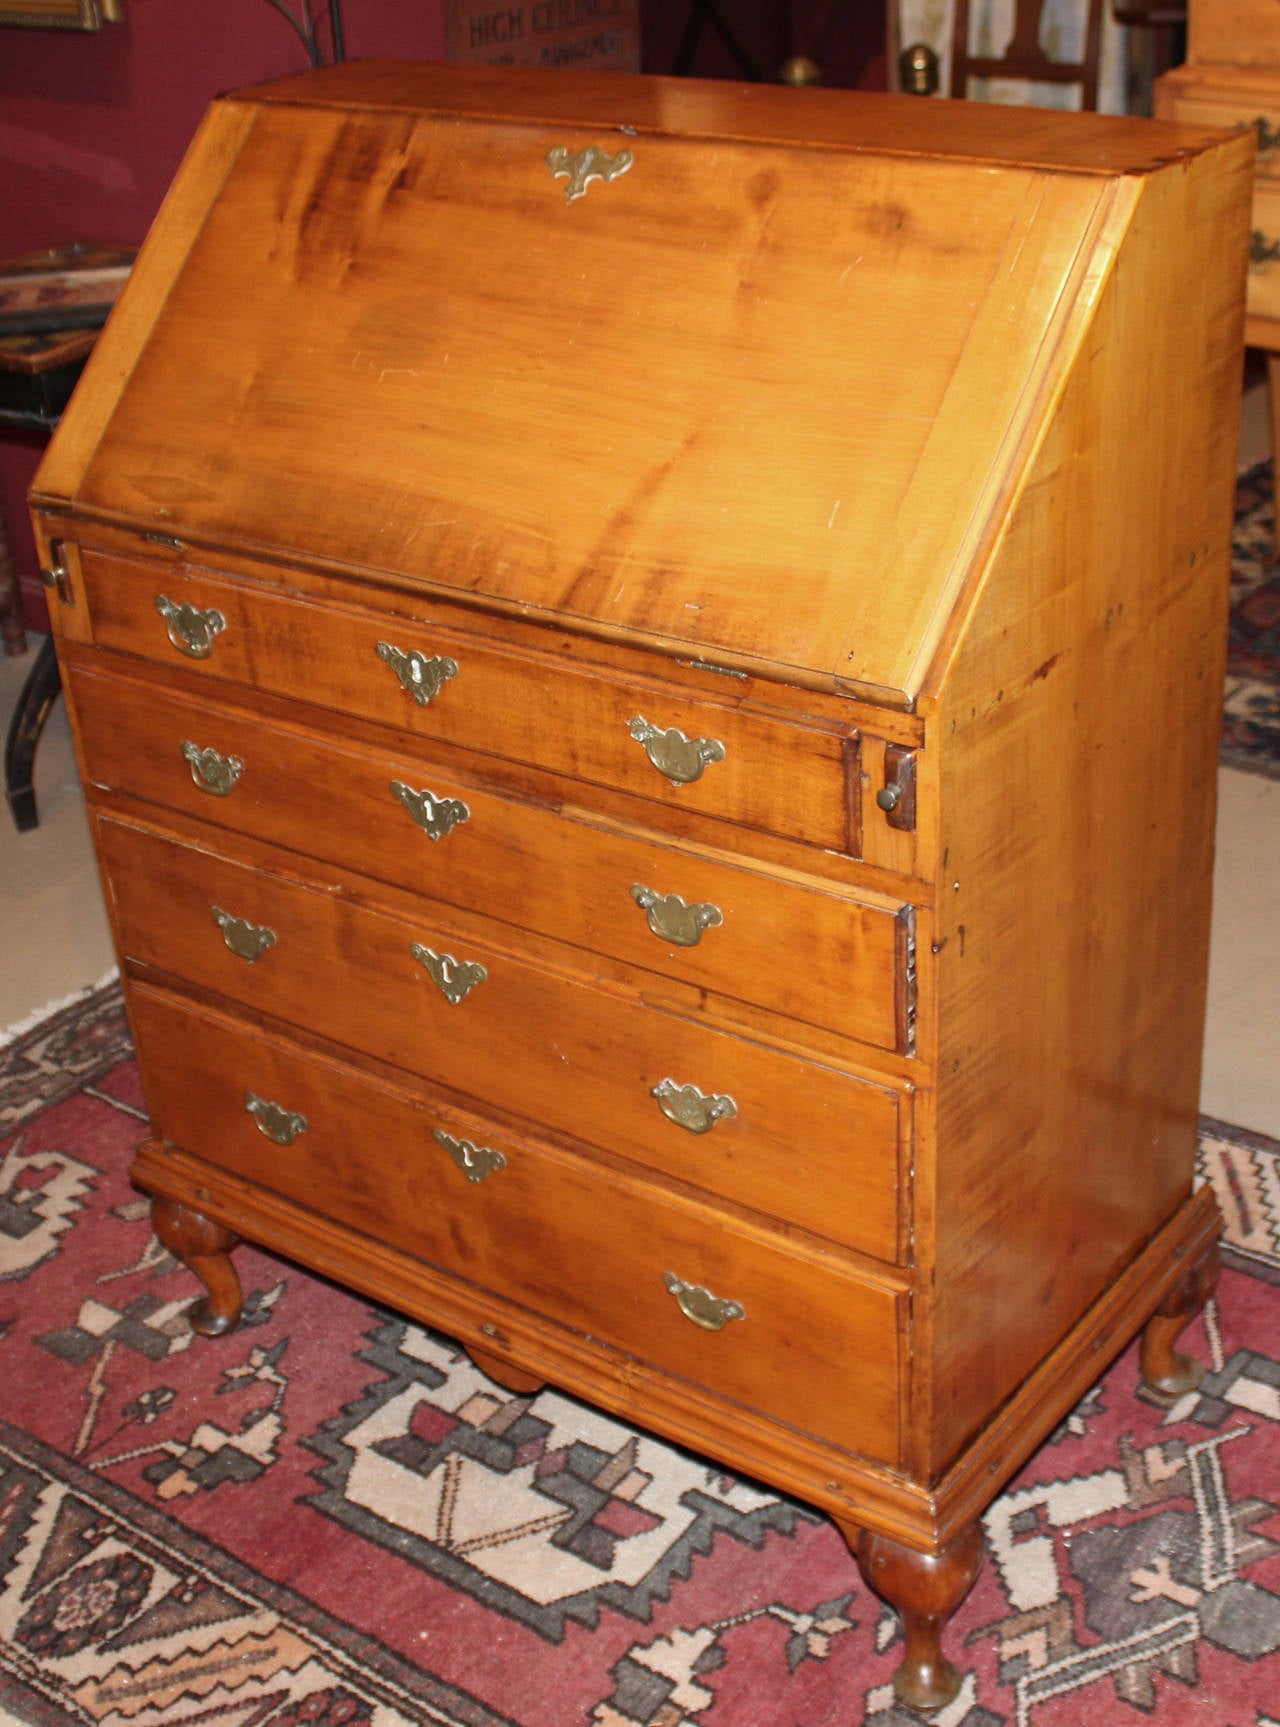 An 18th century maple Queen Anne slant front desk on frame, probably New England origin,  with nicely compartmentalized amphitheatre interior, center prospect flanked by pilaster drawers, period but not original engraved batwing hardware, with the